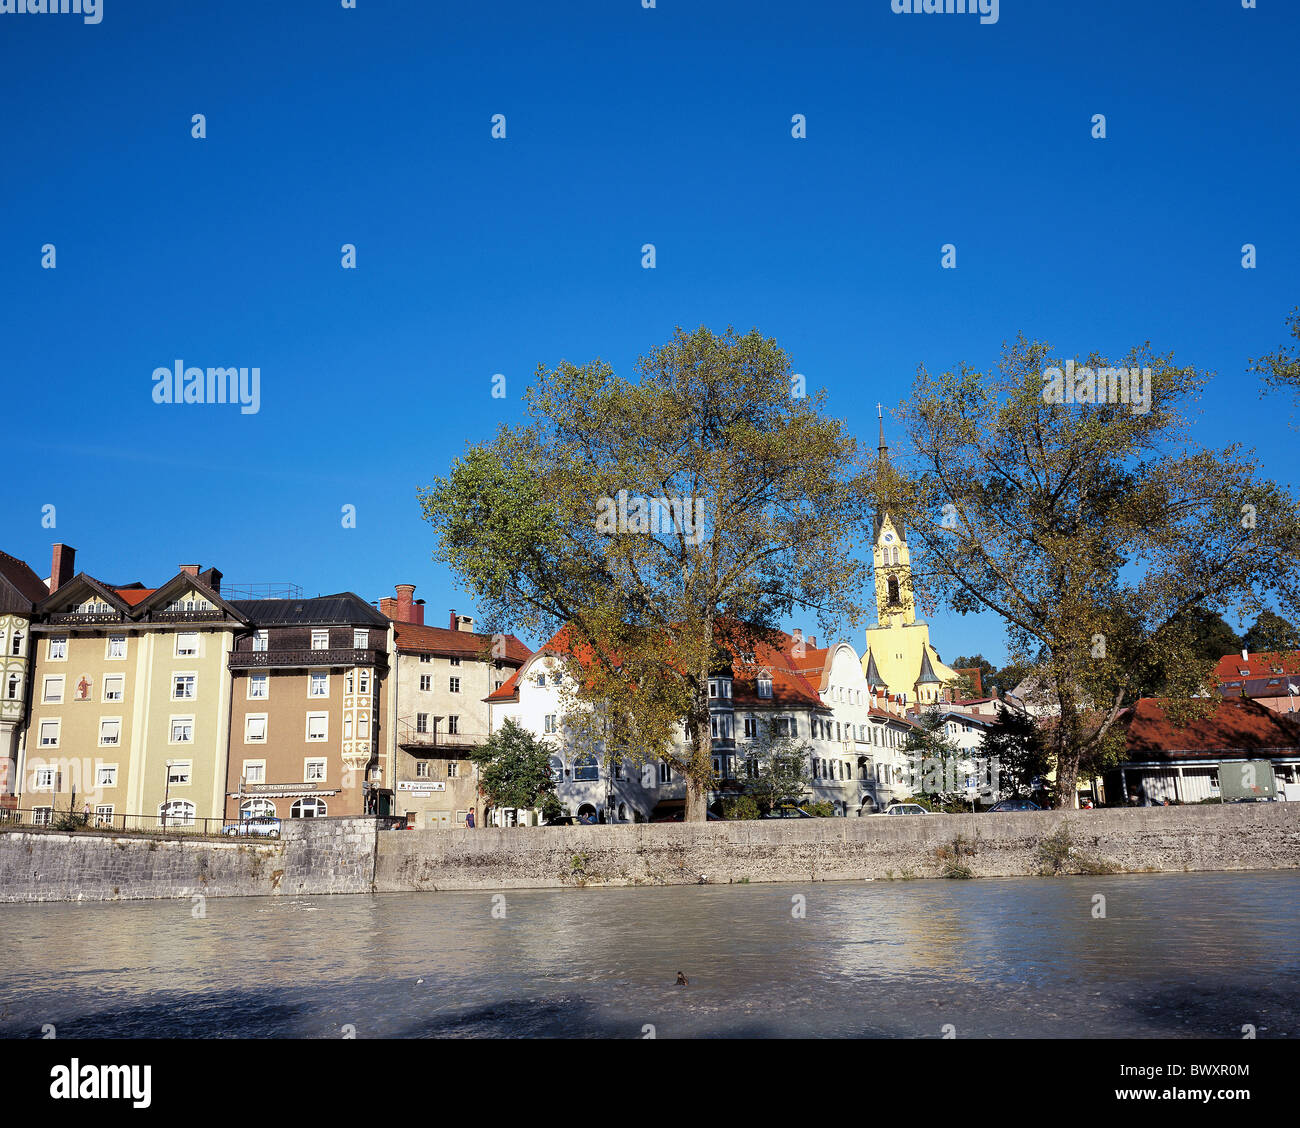 Germany Europe Bavaria bath Bad Tolz Old Town church houses homes river flow cutting part Stock Photo